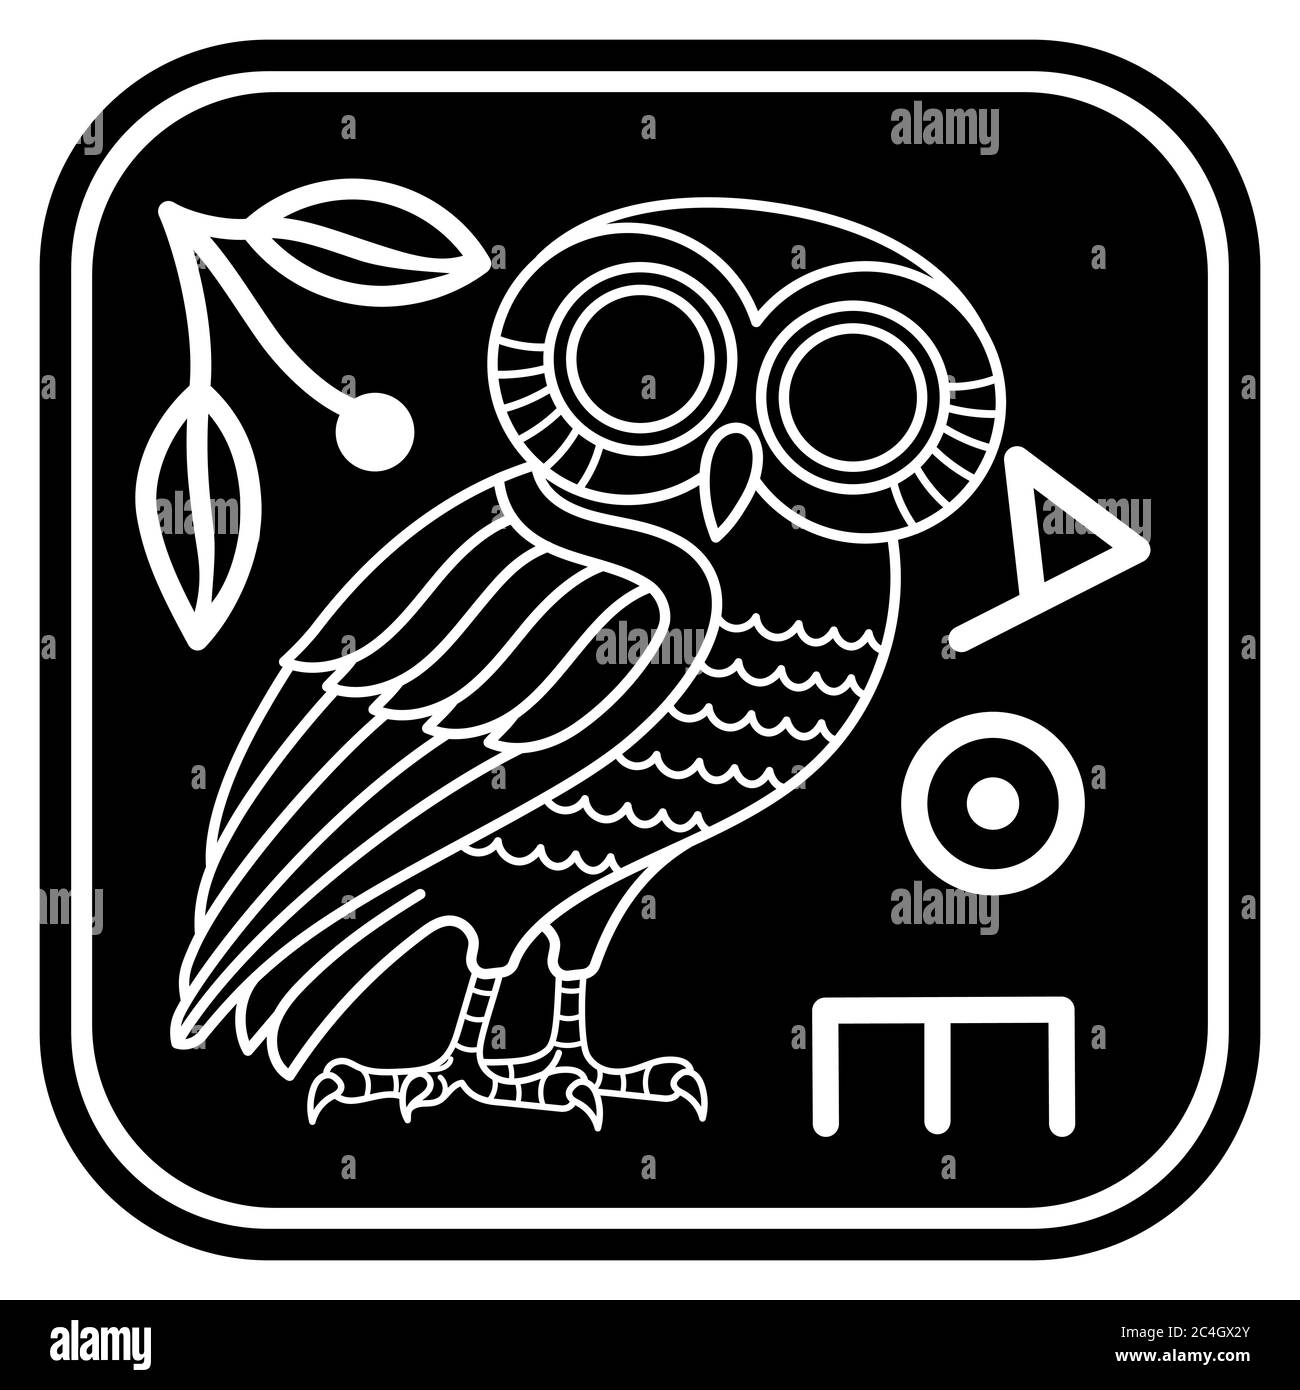 Greek ancient coin from Athens, vintage illustration. Old engraved illustration of an owl and an olive tree branch Stock Vector